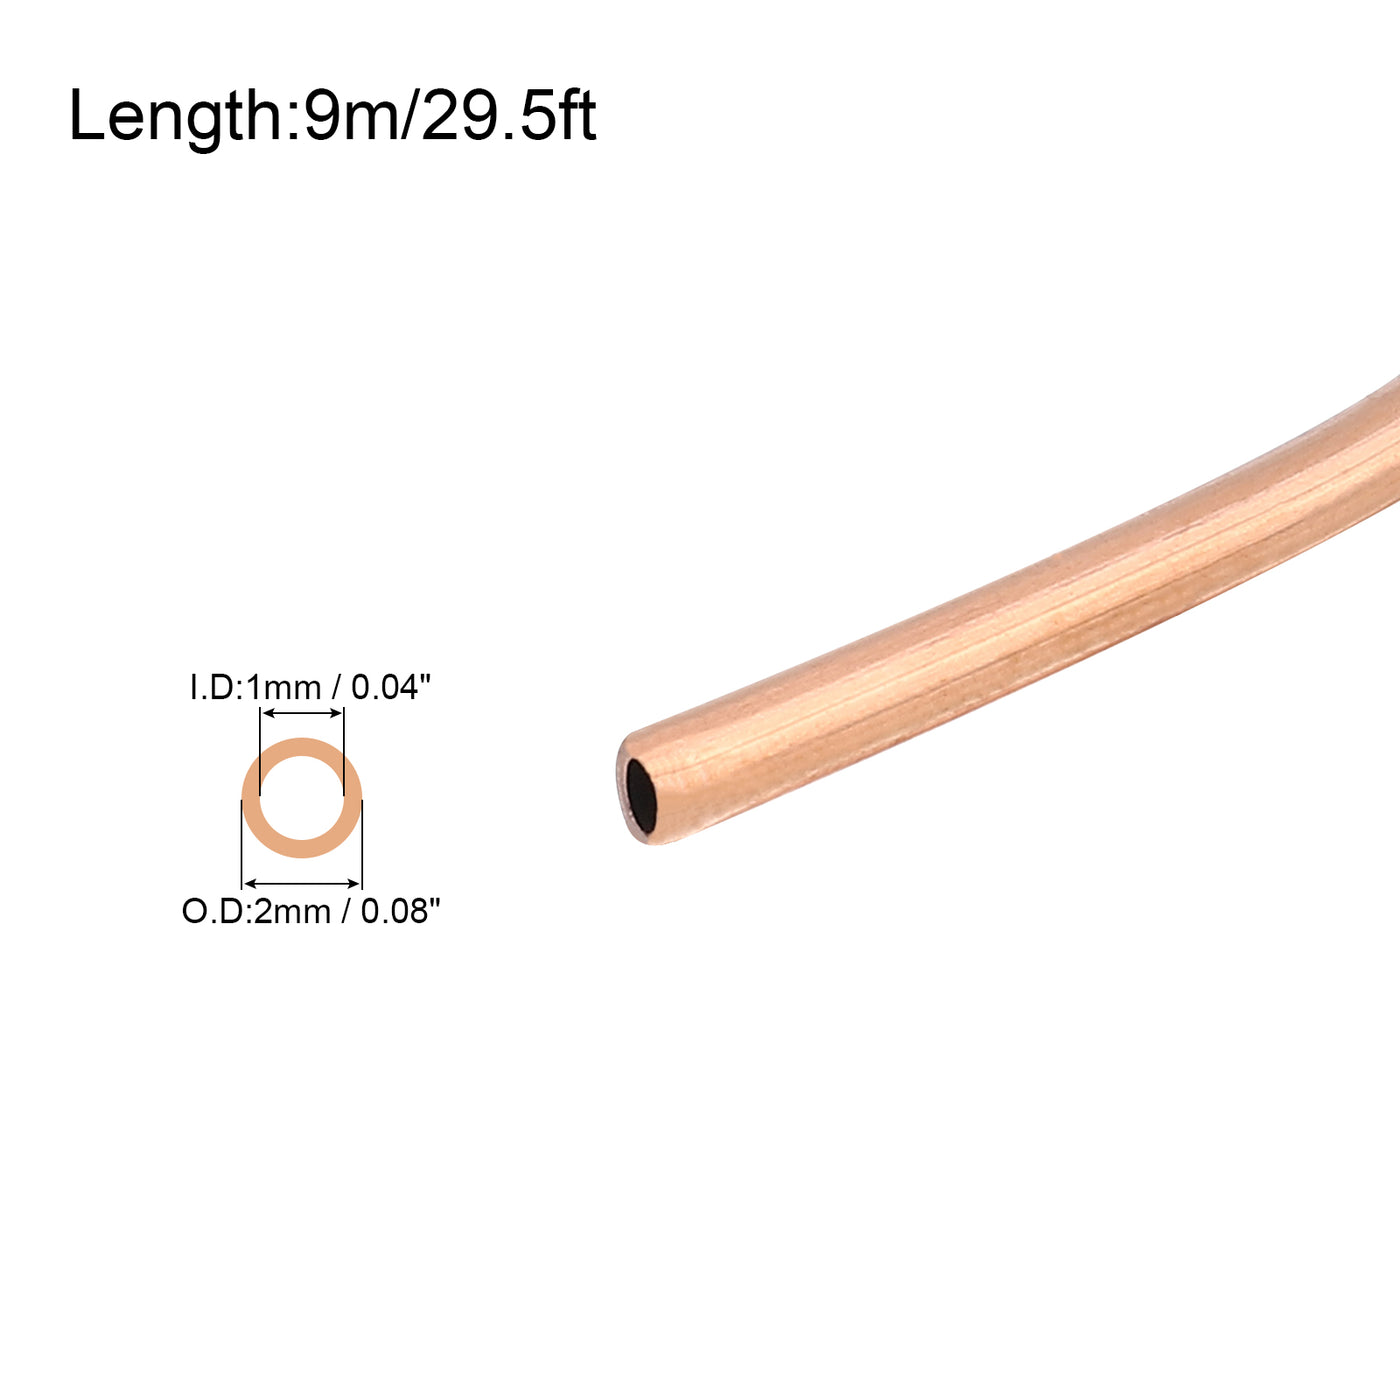 Harfington Copper Tube Refrigeration Tubing 5/64" OD x 3/64" ID x 29.5Ft Seamless Round Pipe Coil for Refrigerator, Freezer, Air Conditioner